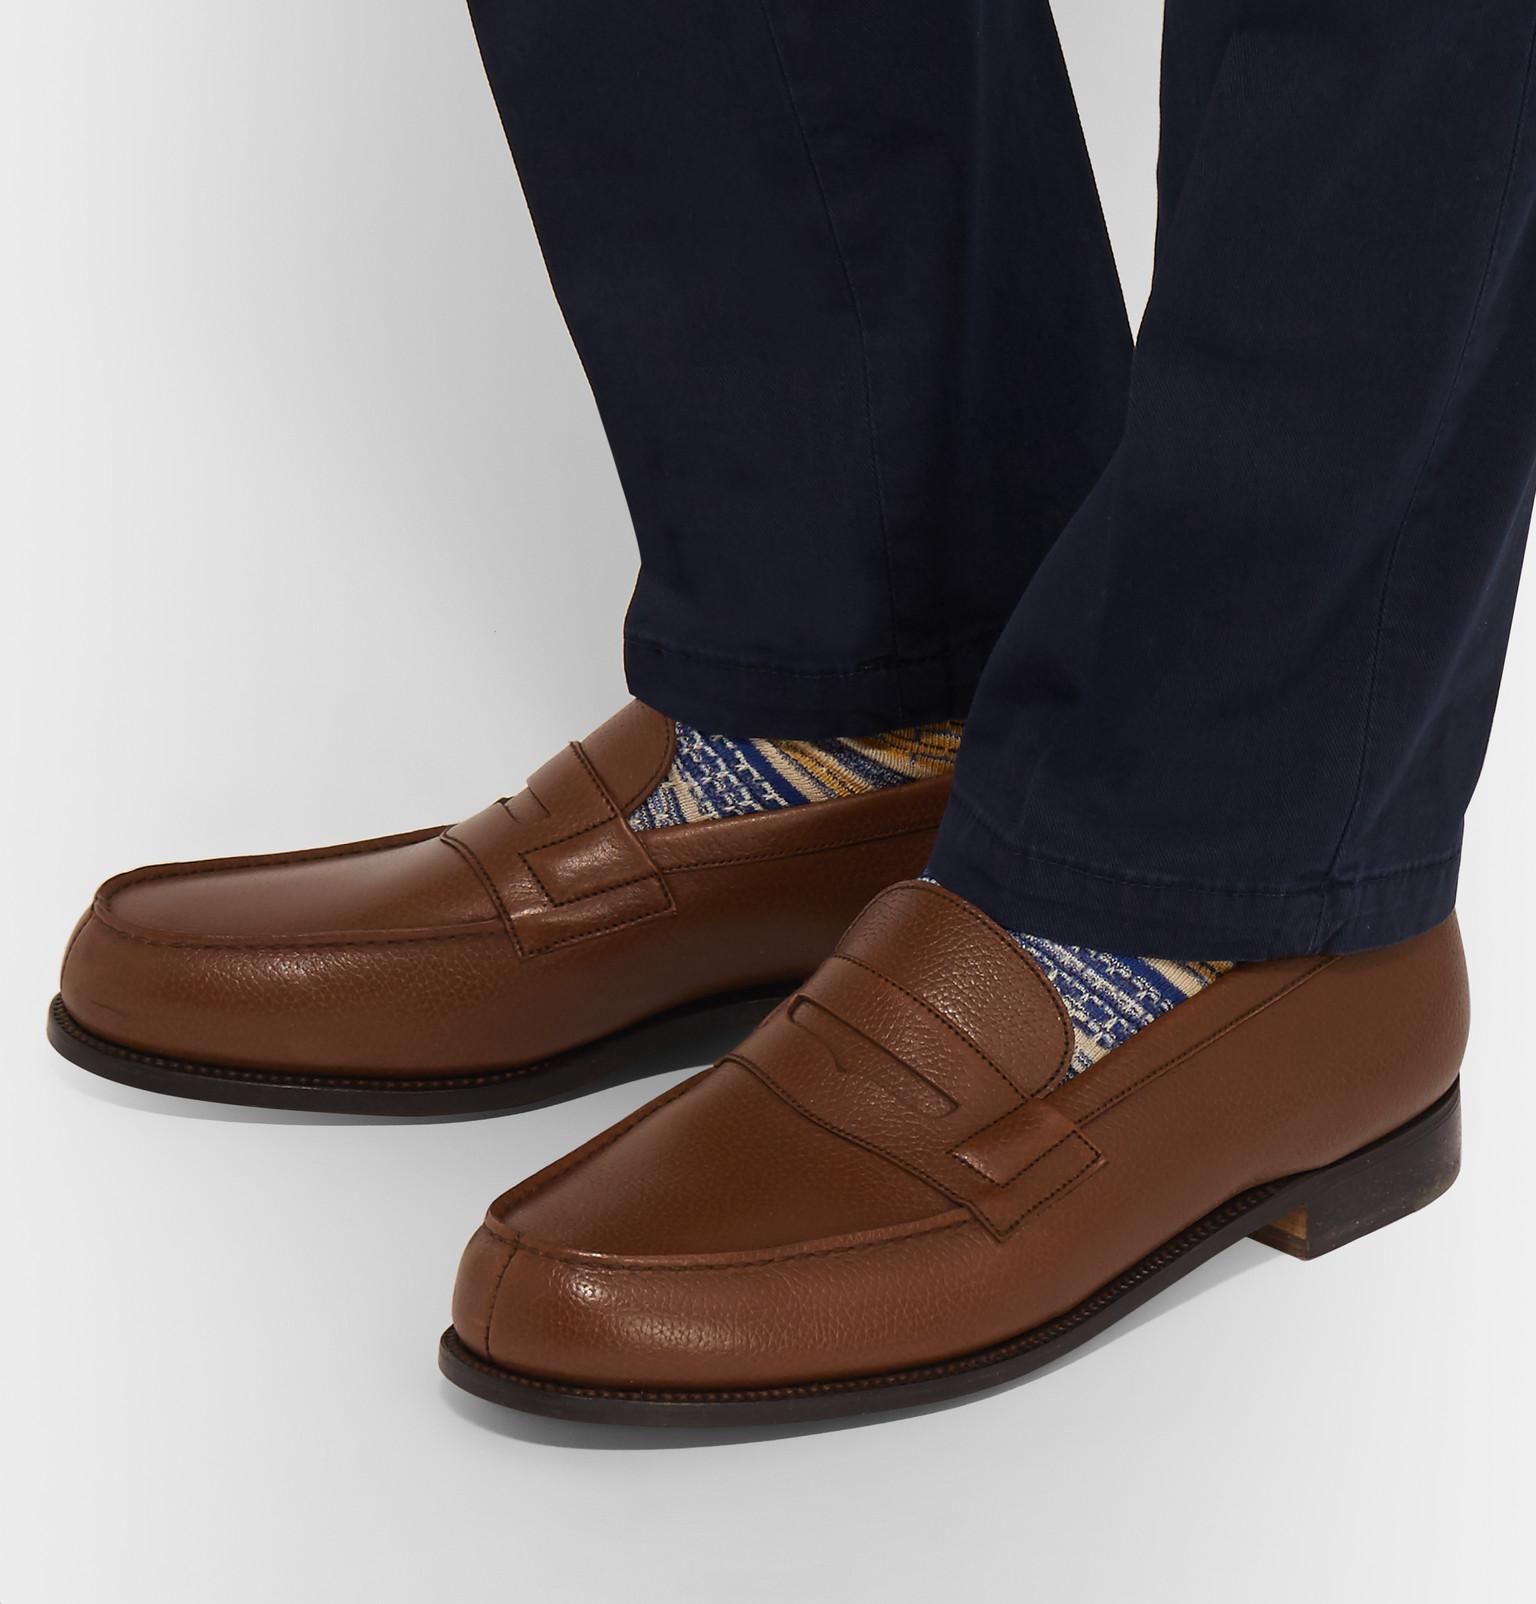 Lyst - J.M. Weston 180 The Moccasin Grained-leather Loafers in Brown ...